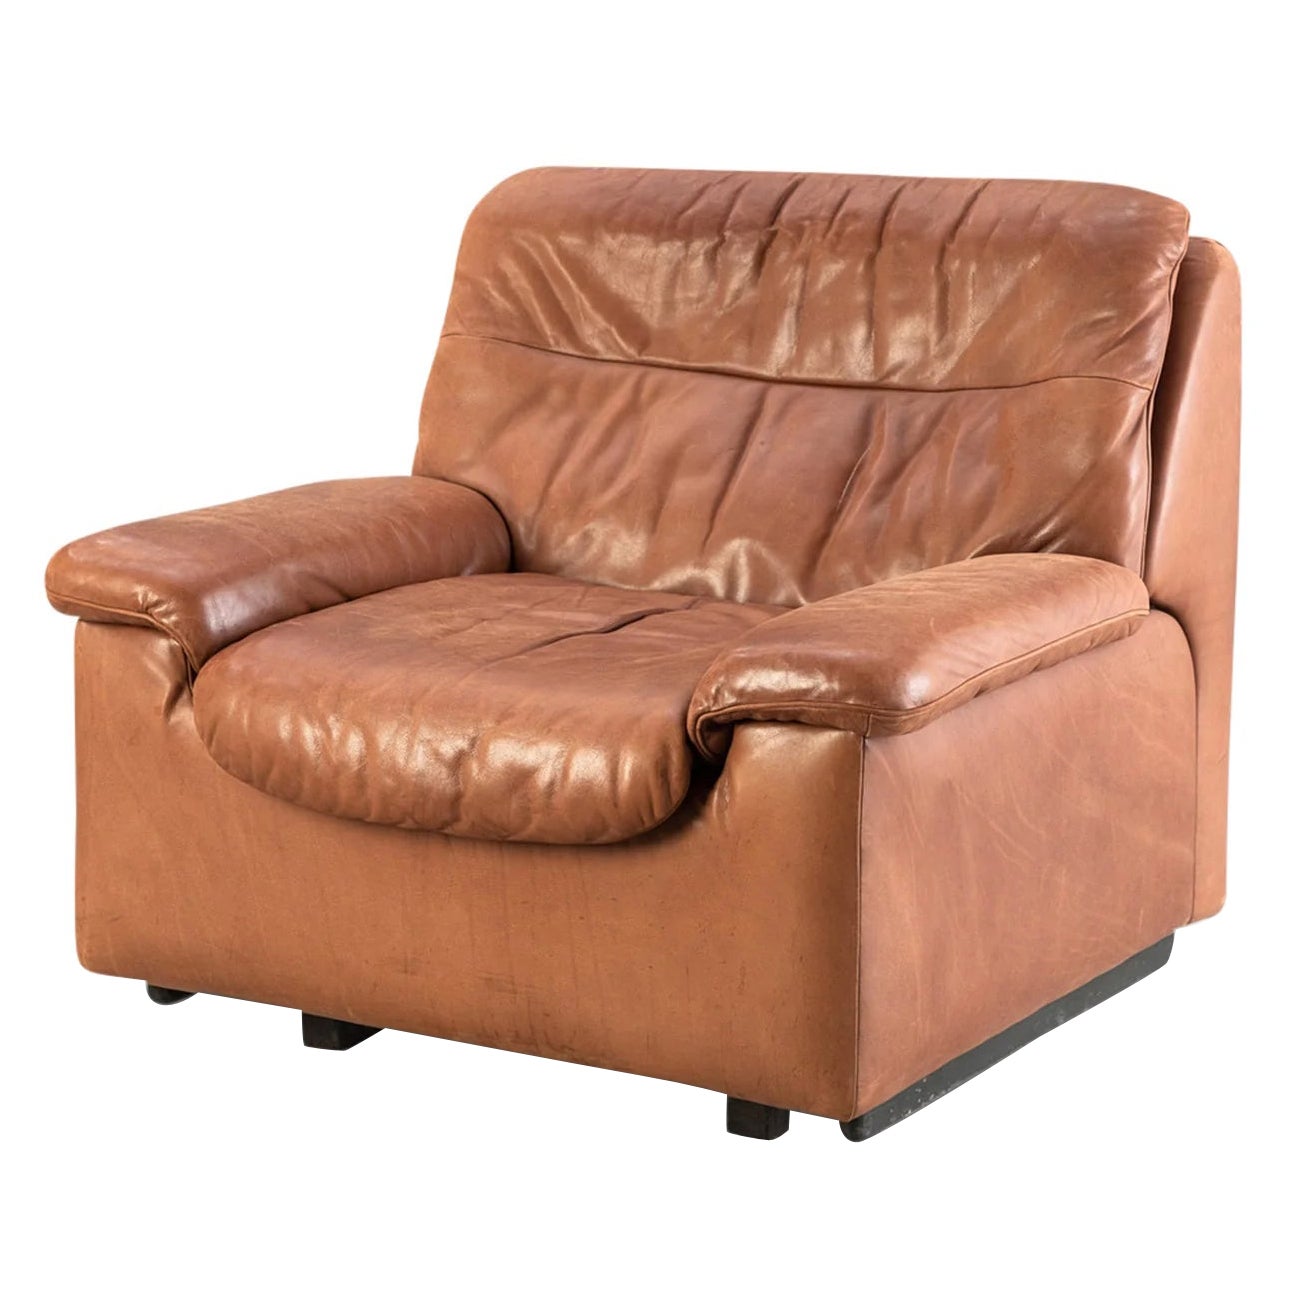 Desede "Ds-66" lounge chair in patinated leather For Sale